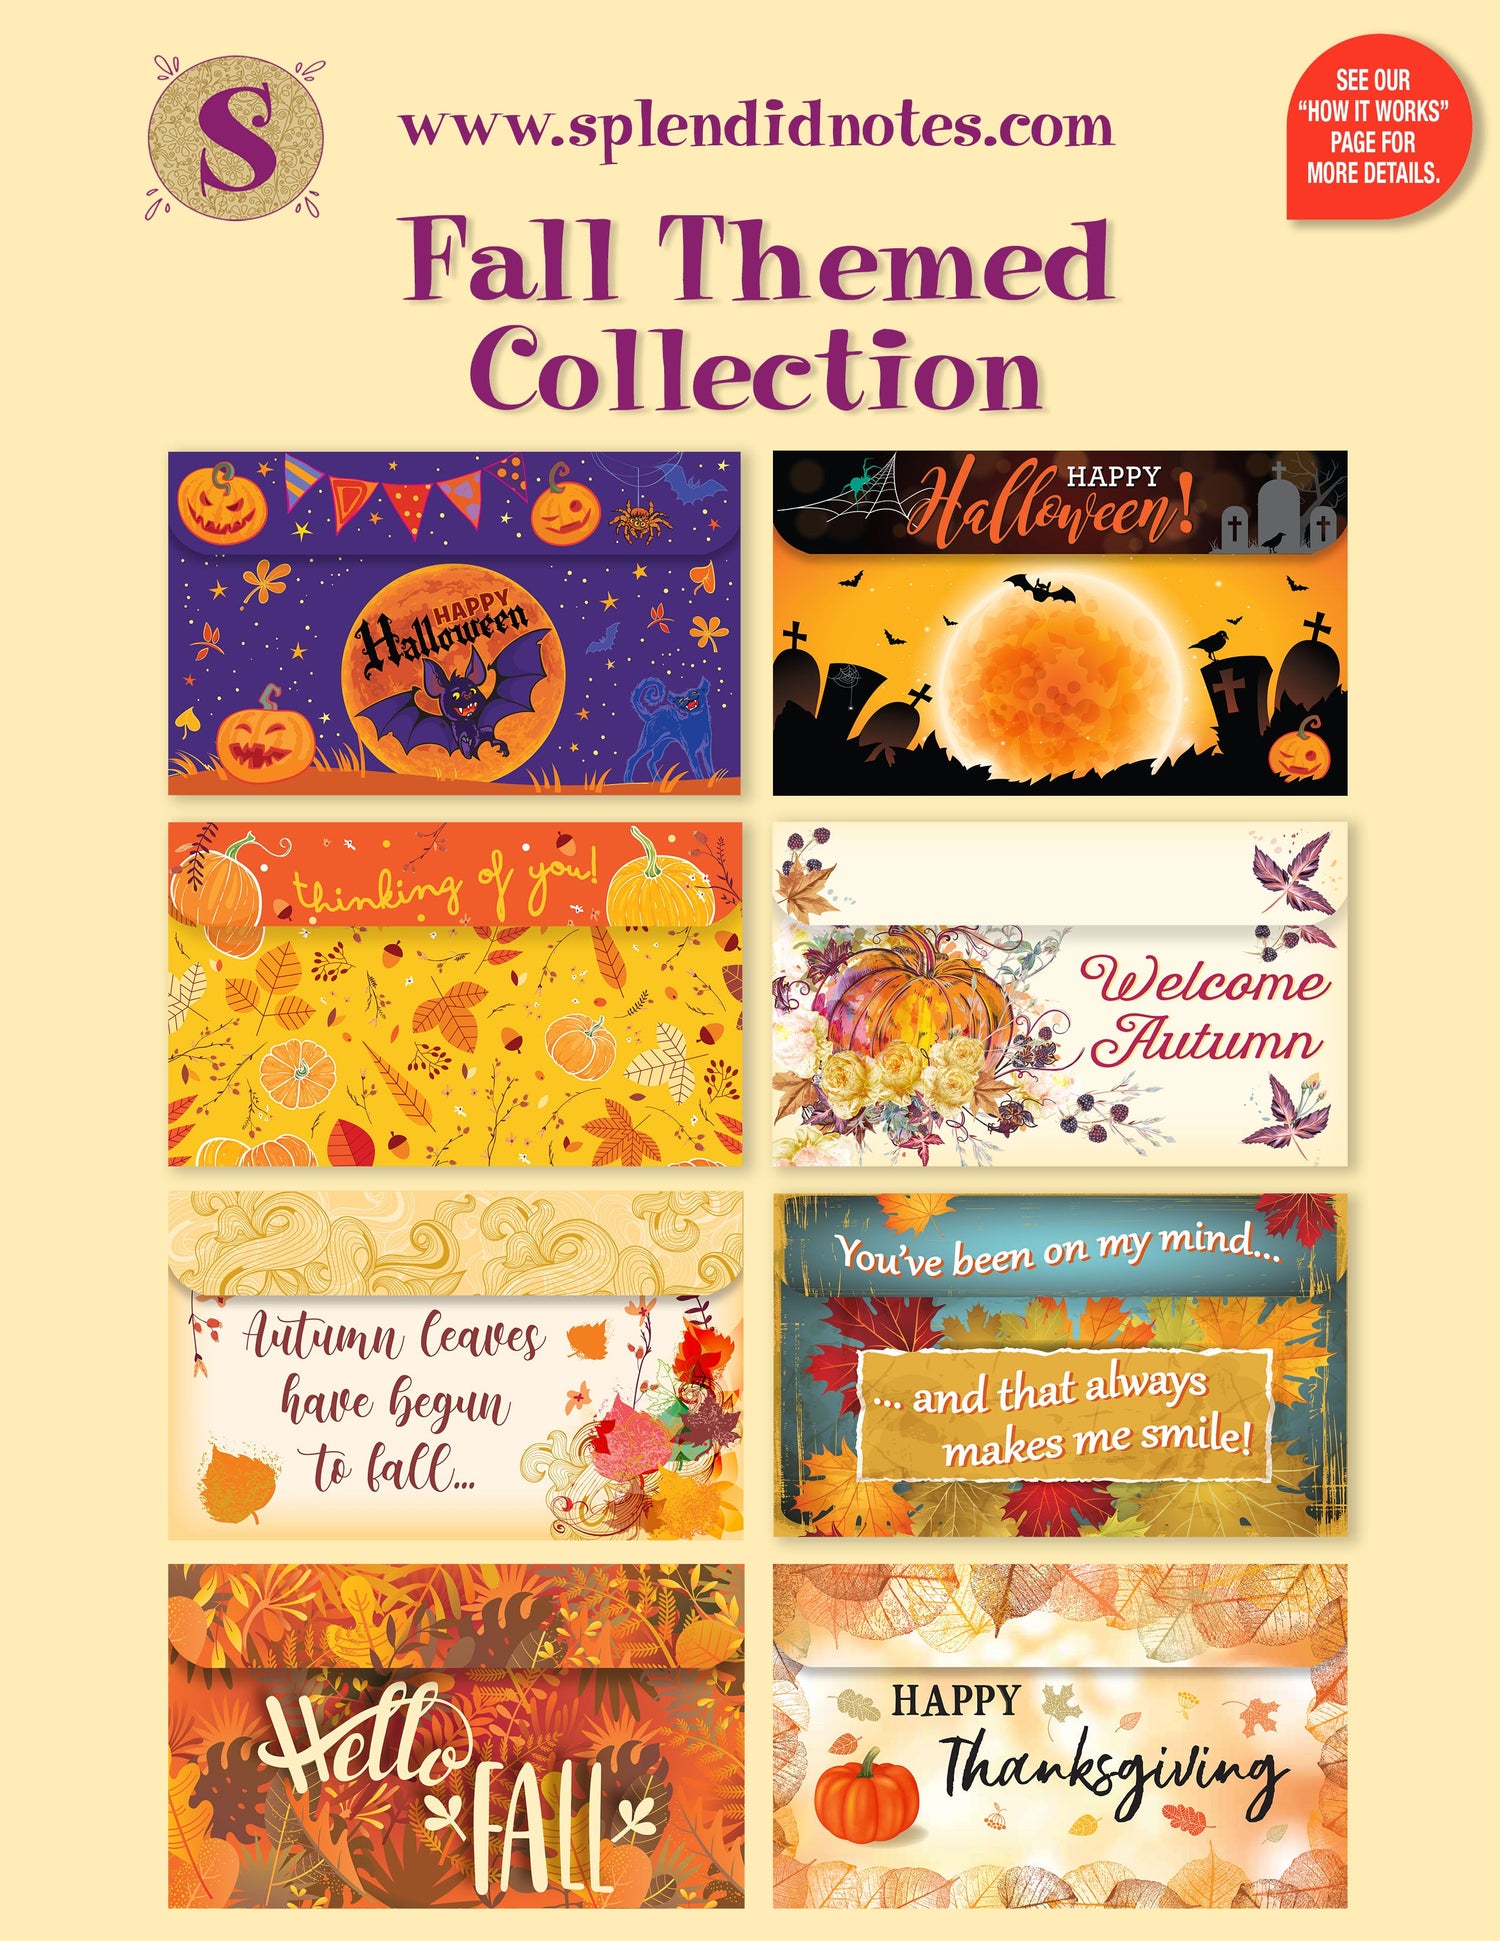 Fall Themed Note Collection